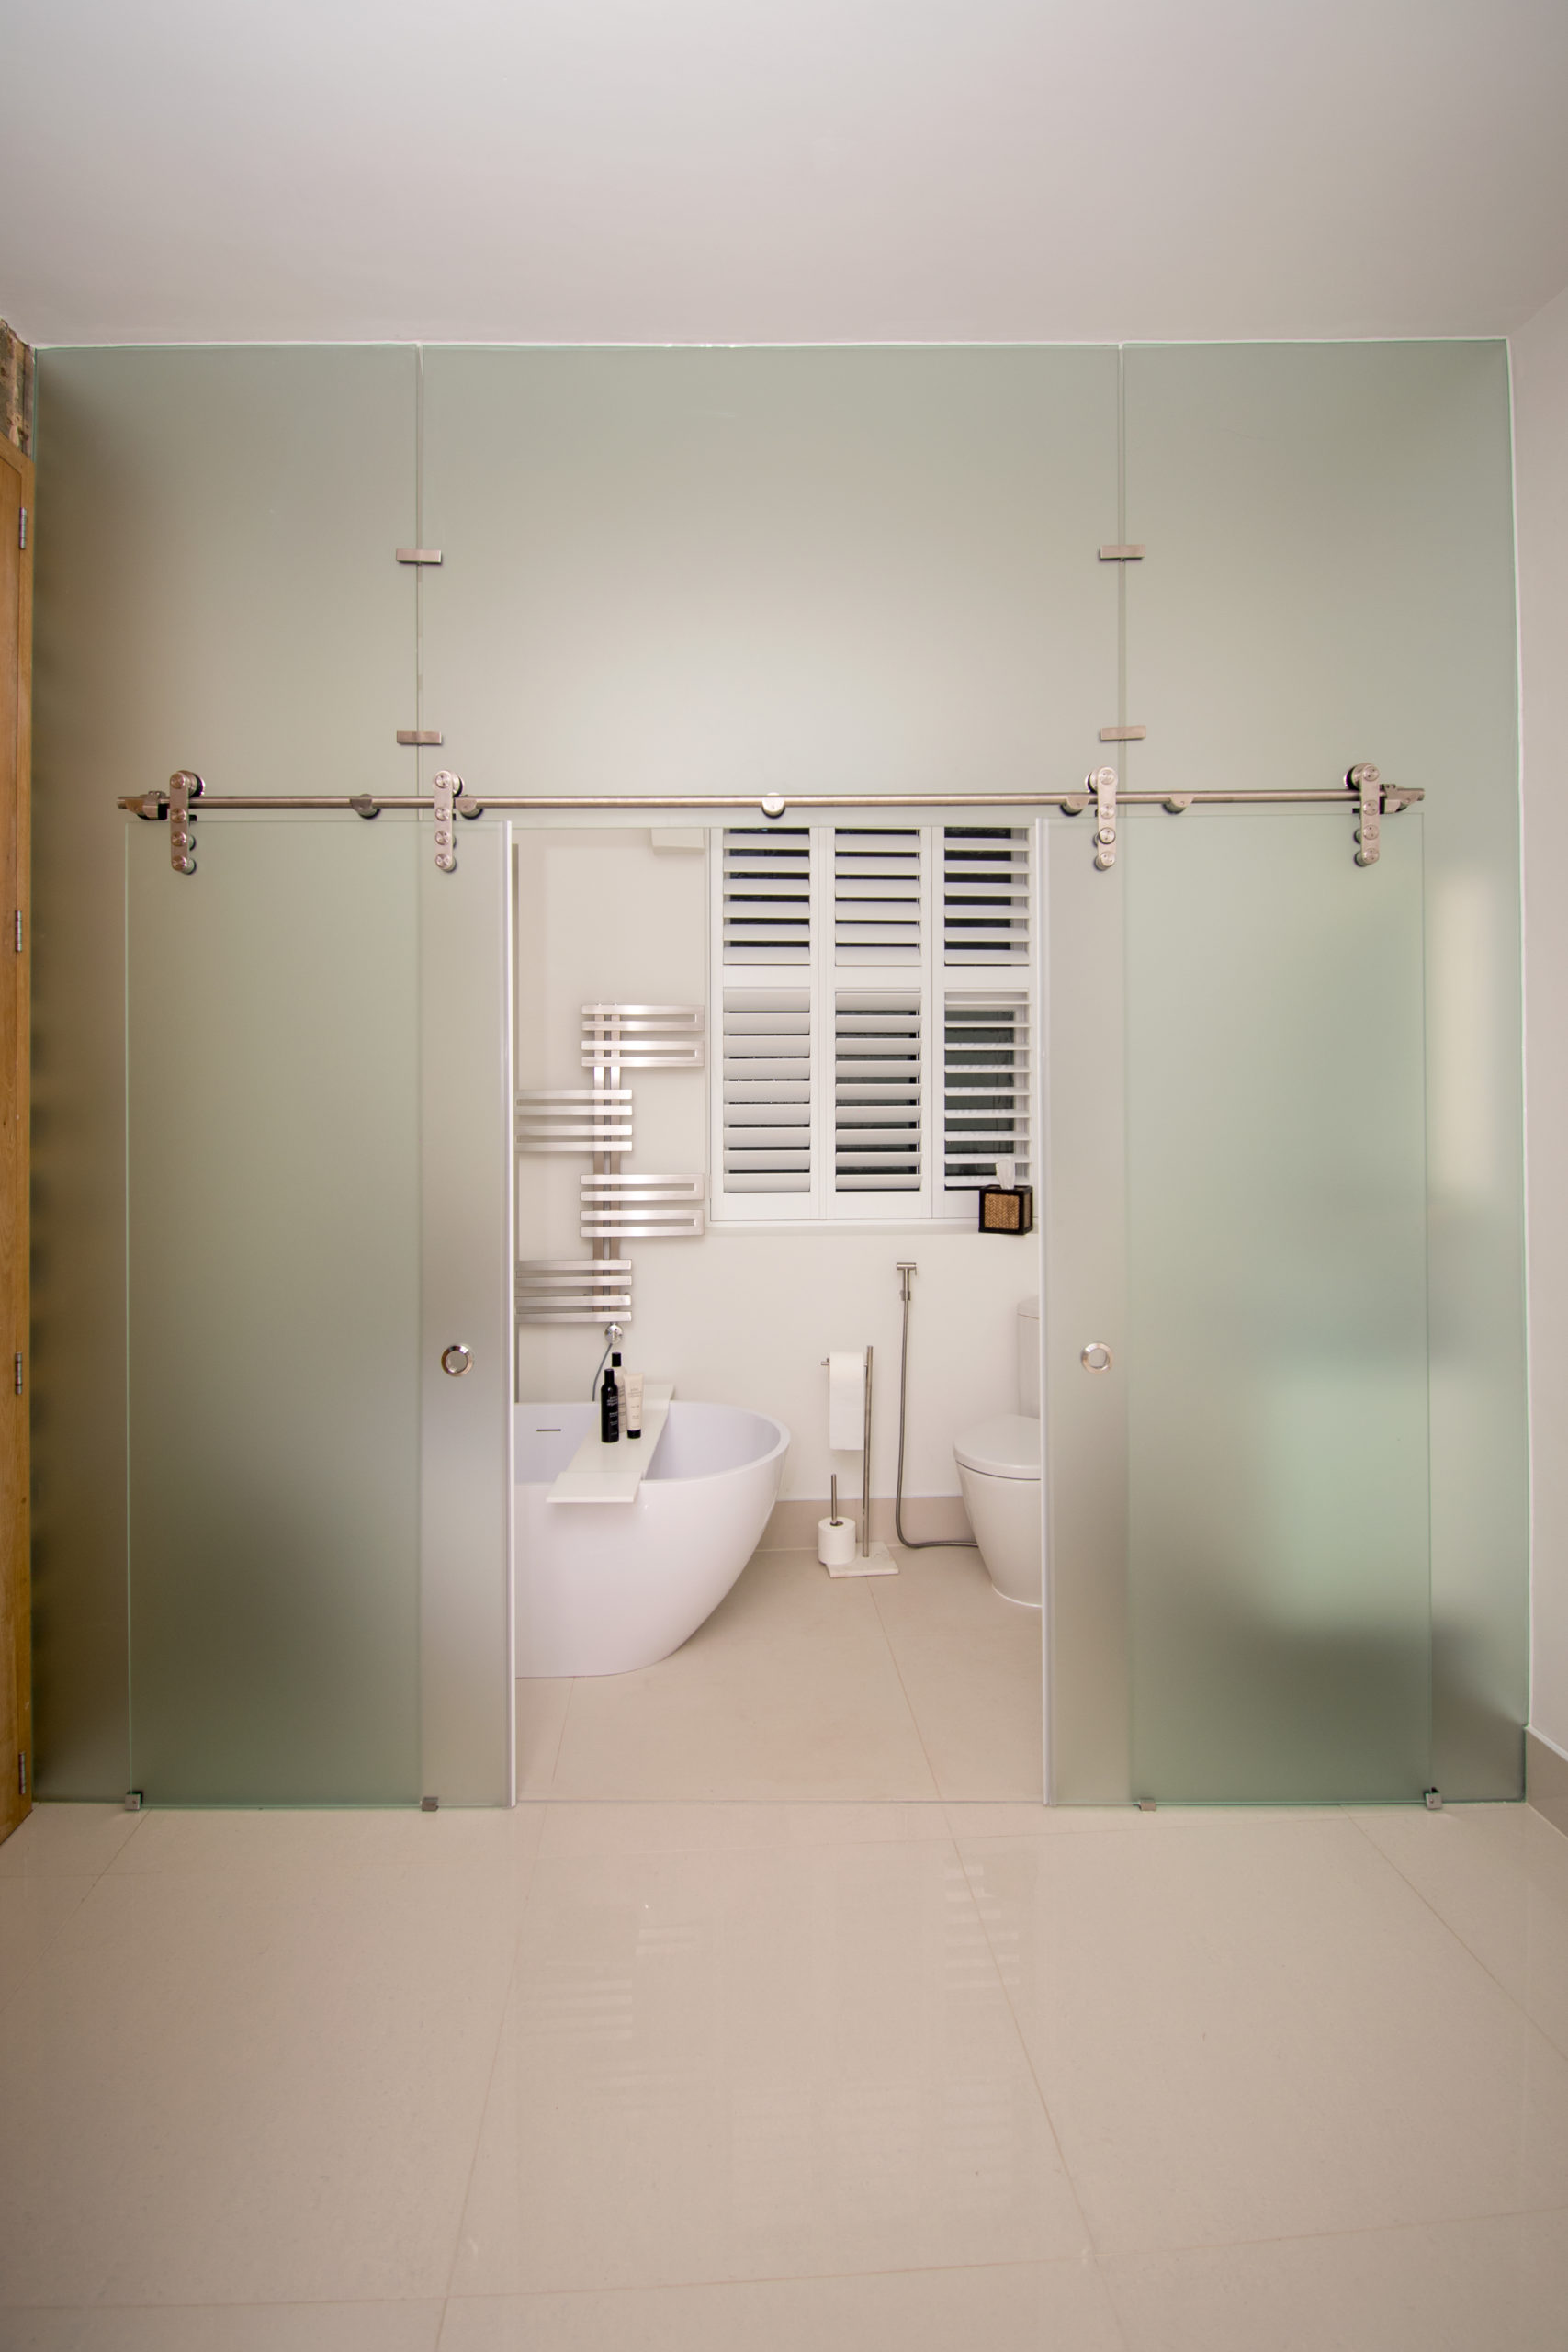 Shower enclosure with frosty glass